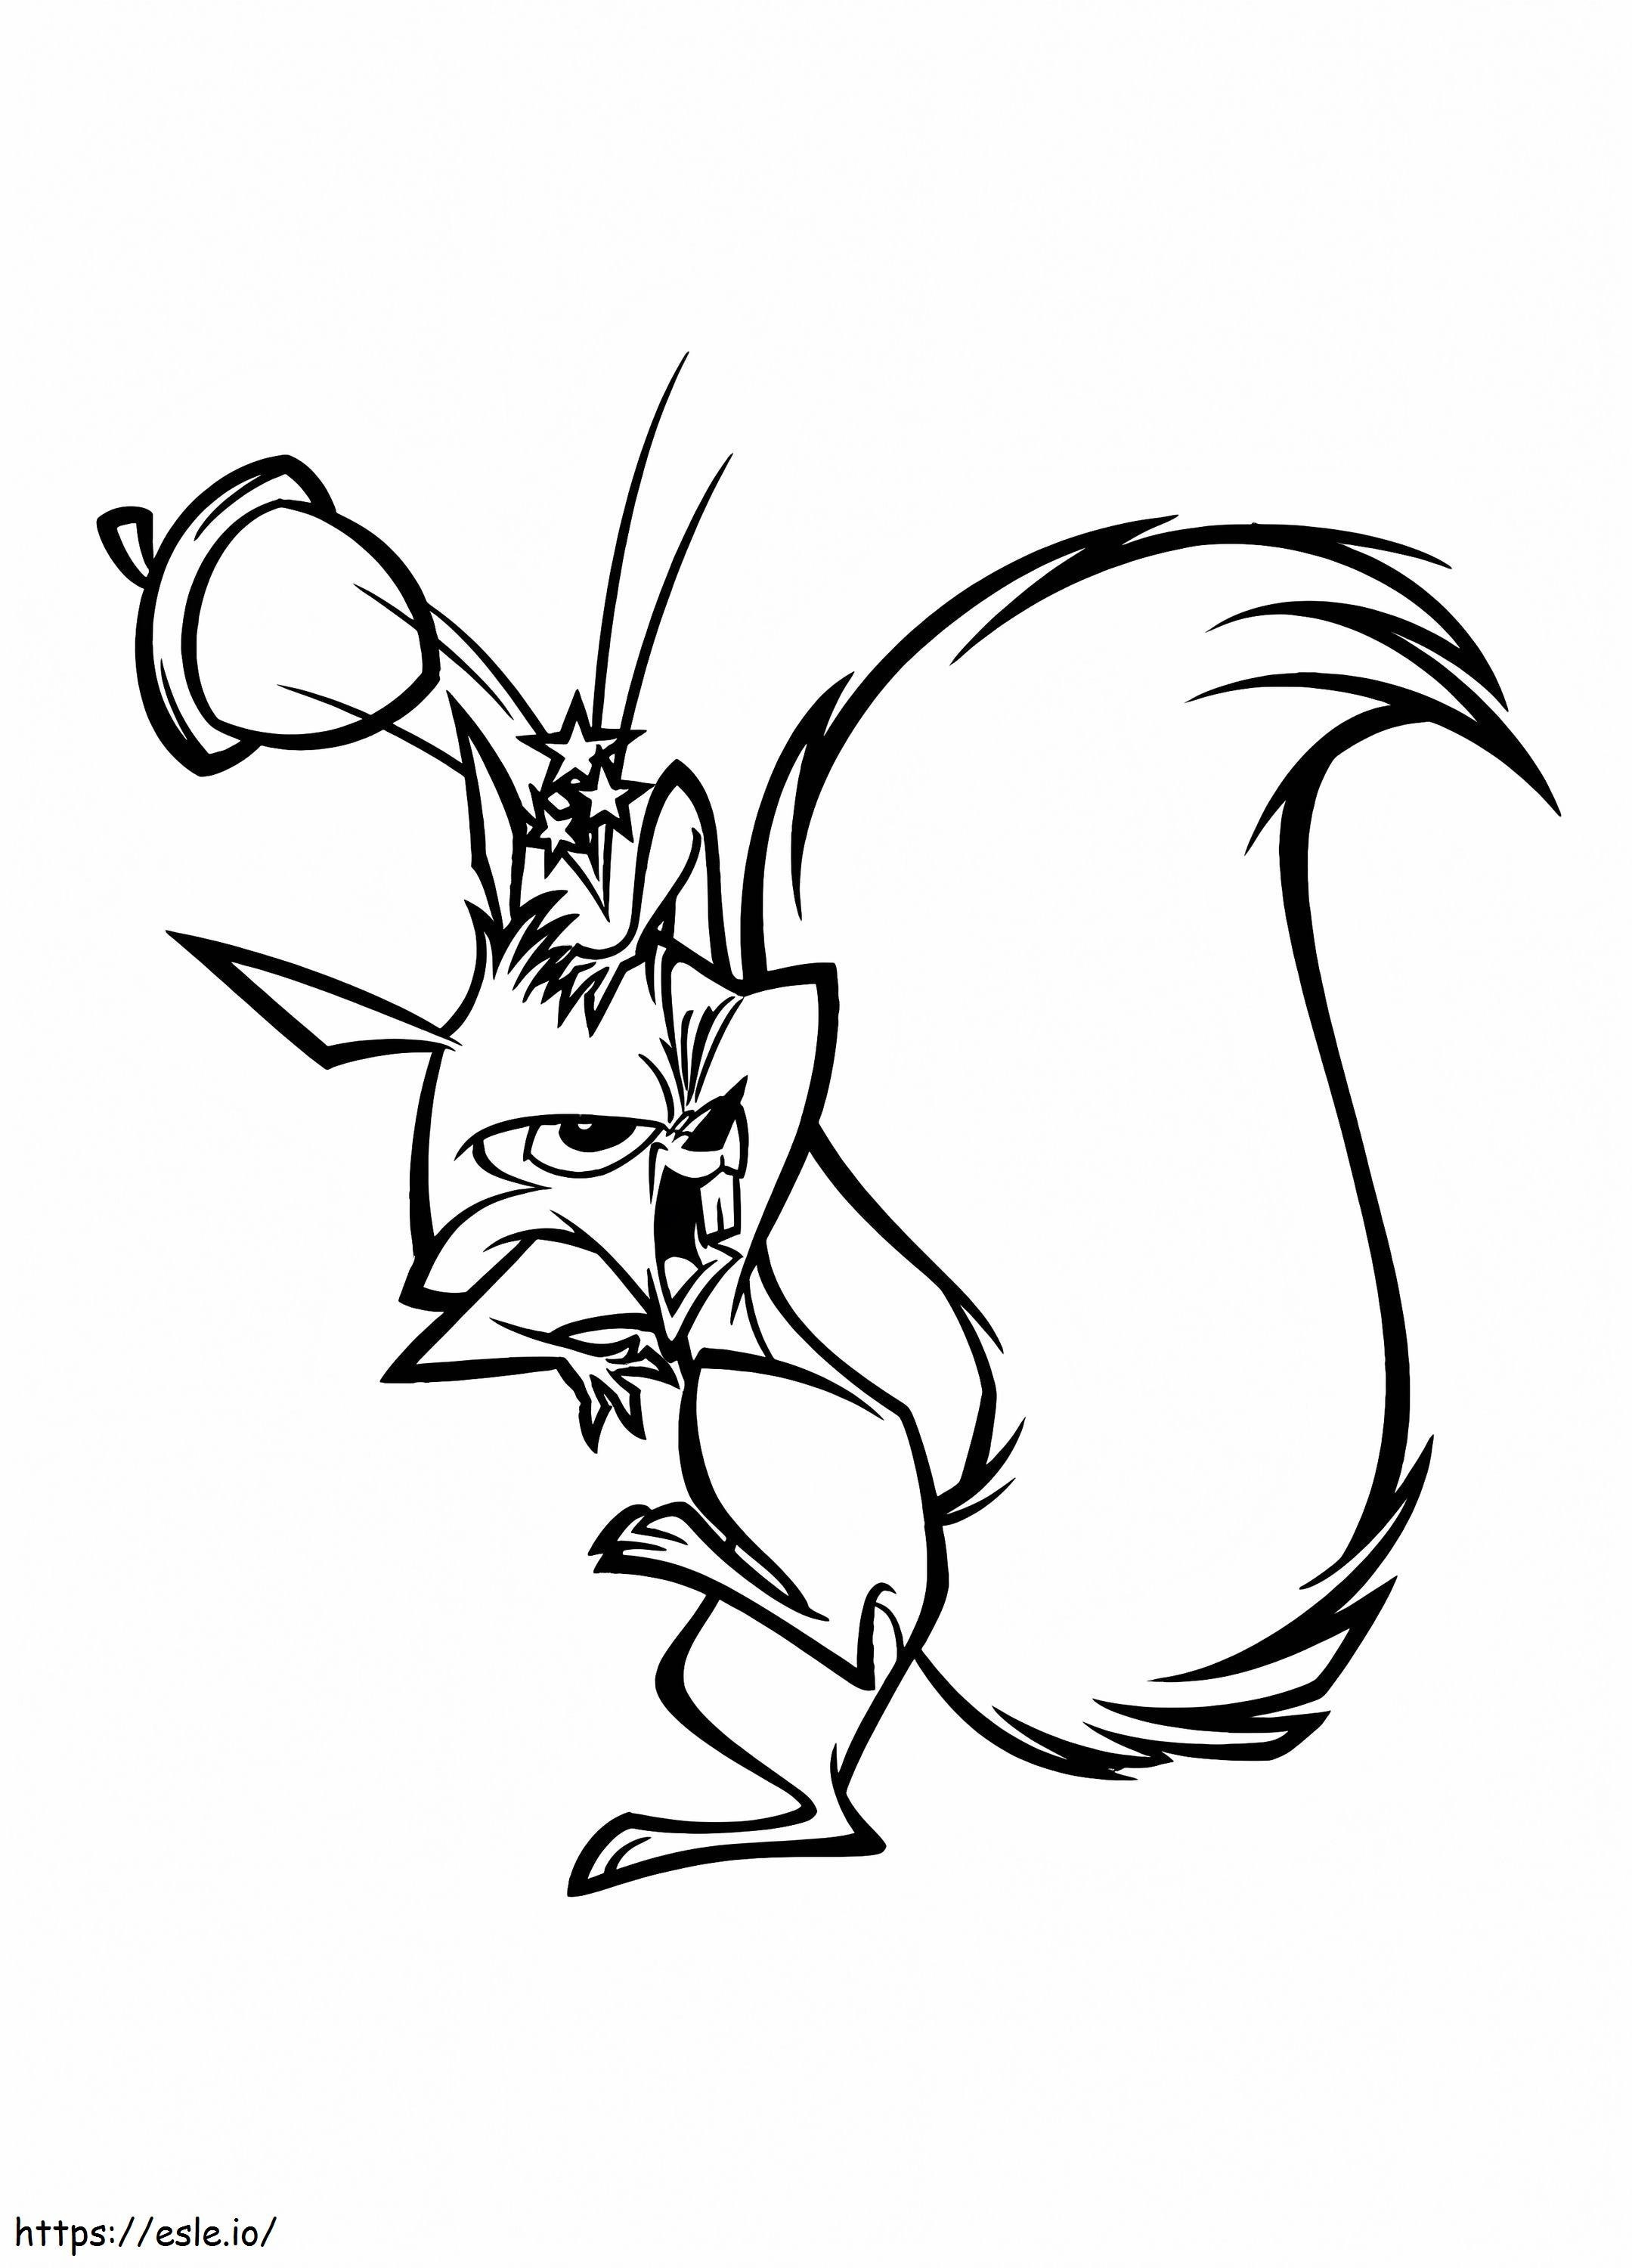 Bucky The Squirrel coloring page